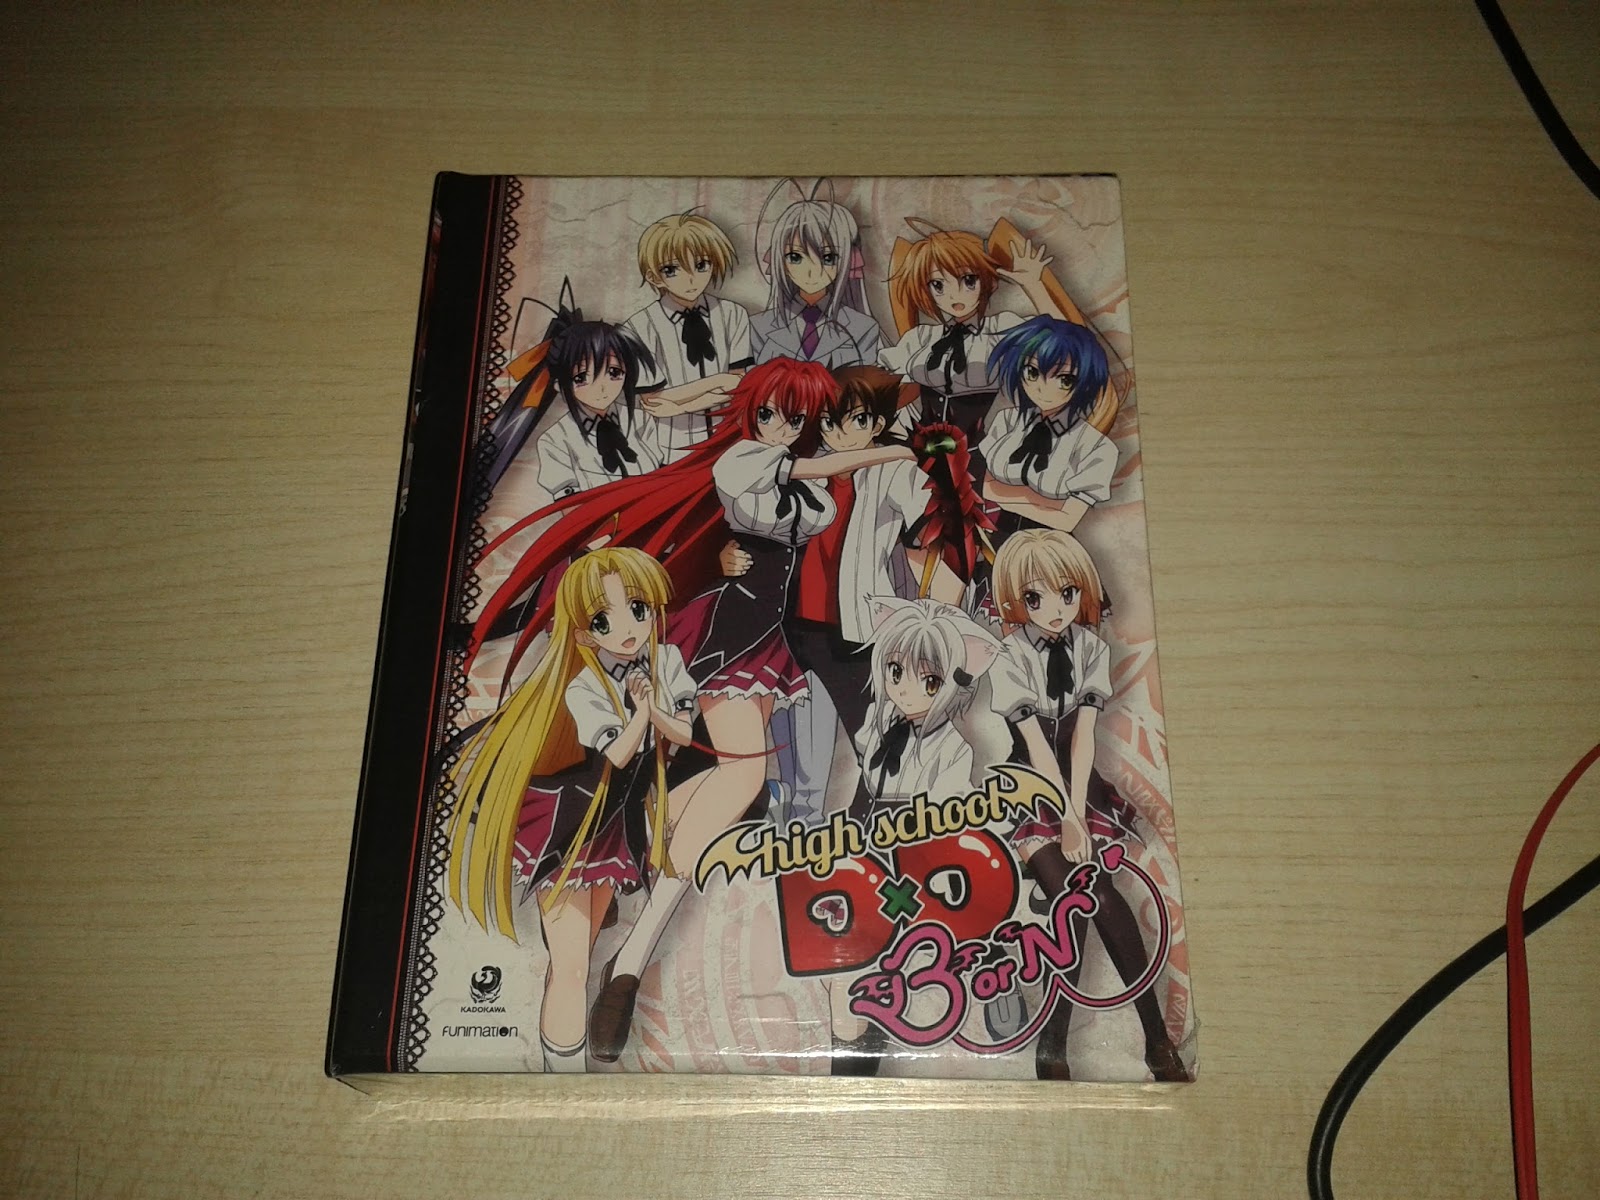 High School DxD season 2: NEW complete / NEW anime on Blu-ray from  FUNimation